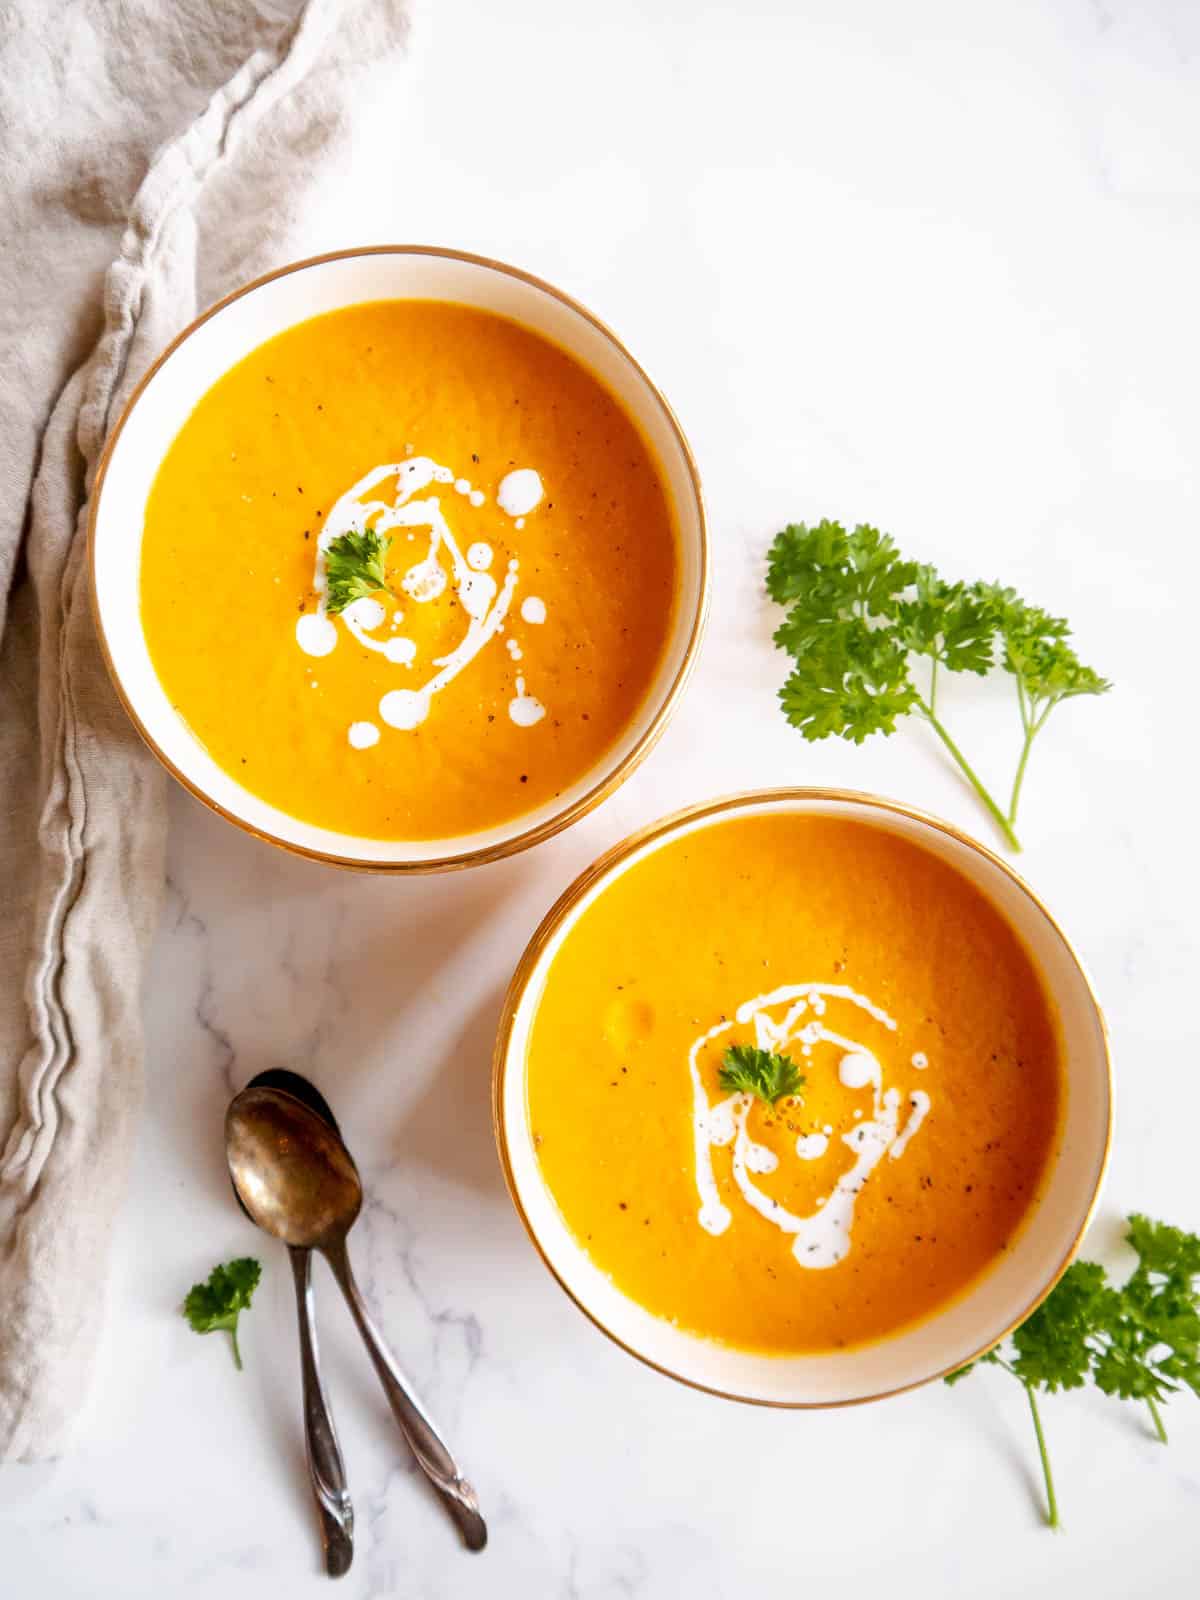 Roasted butternut squash and carrot soup in two bowls.